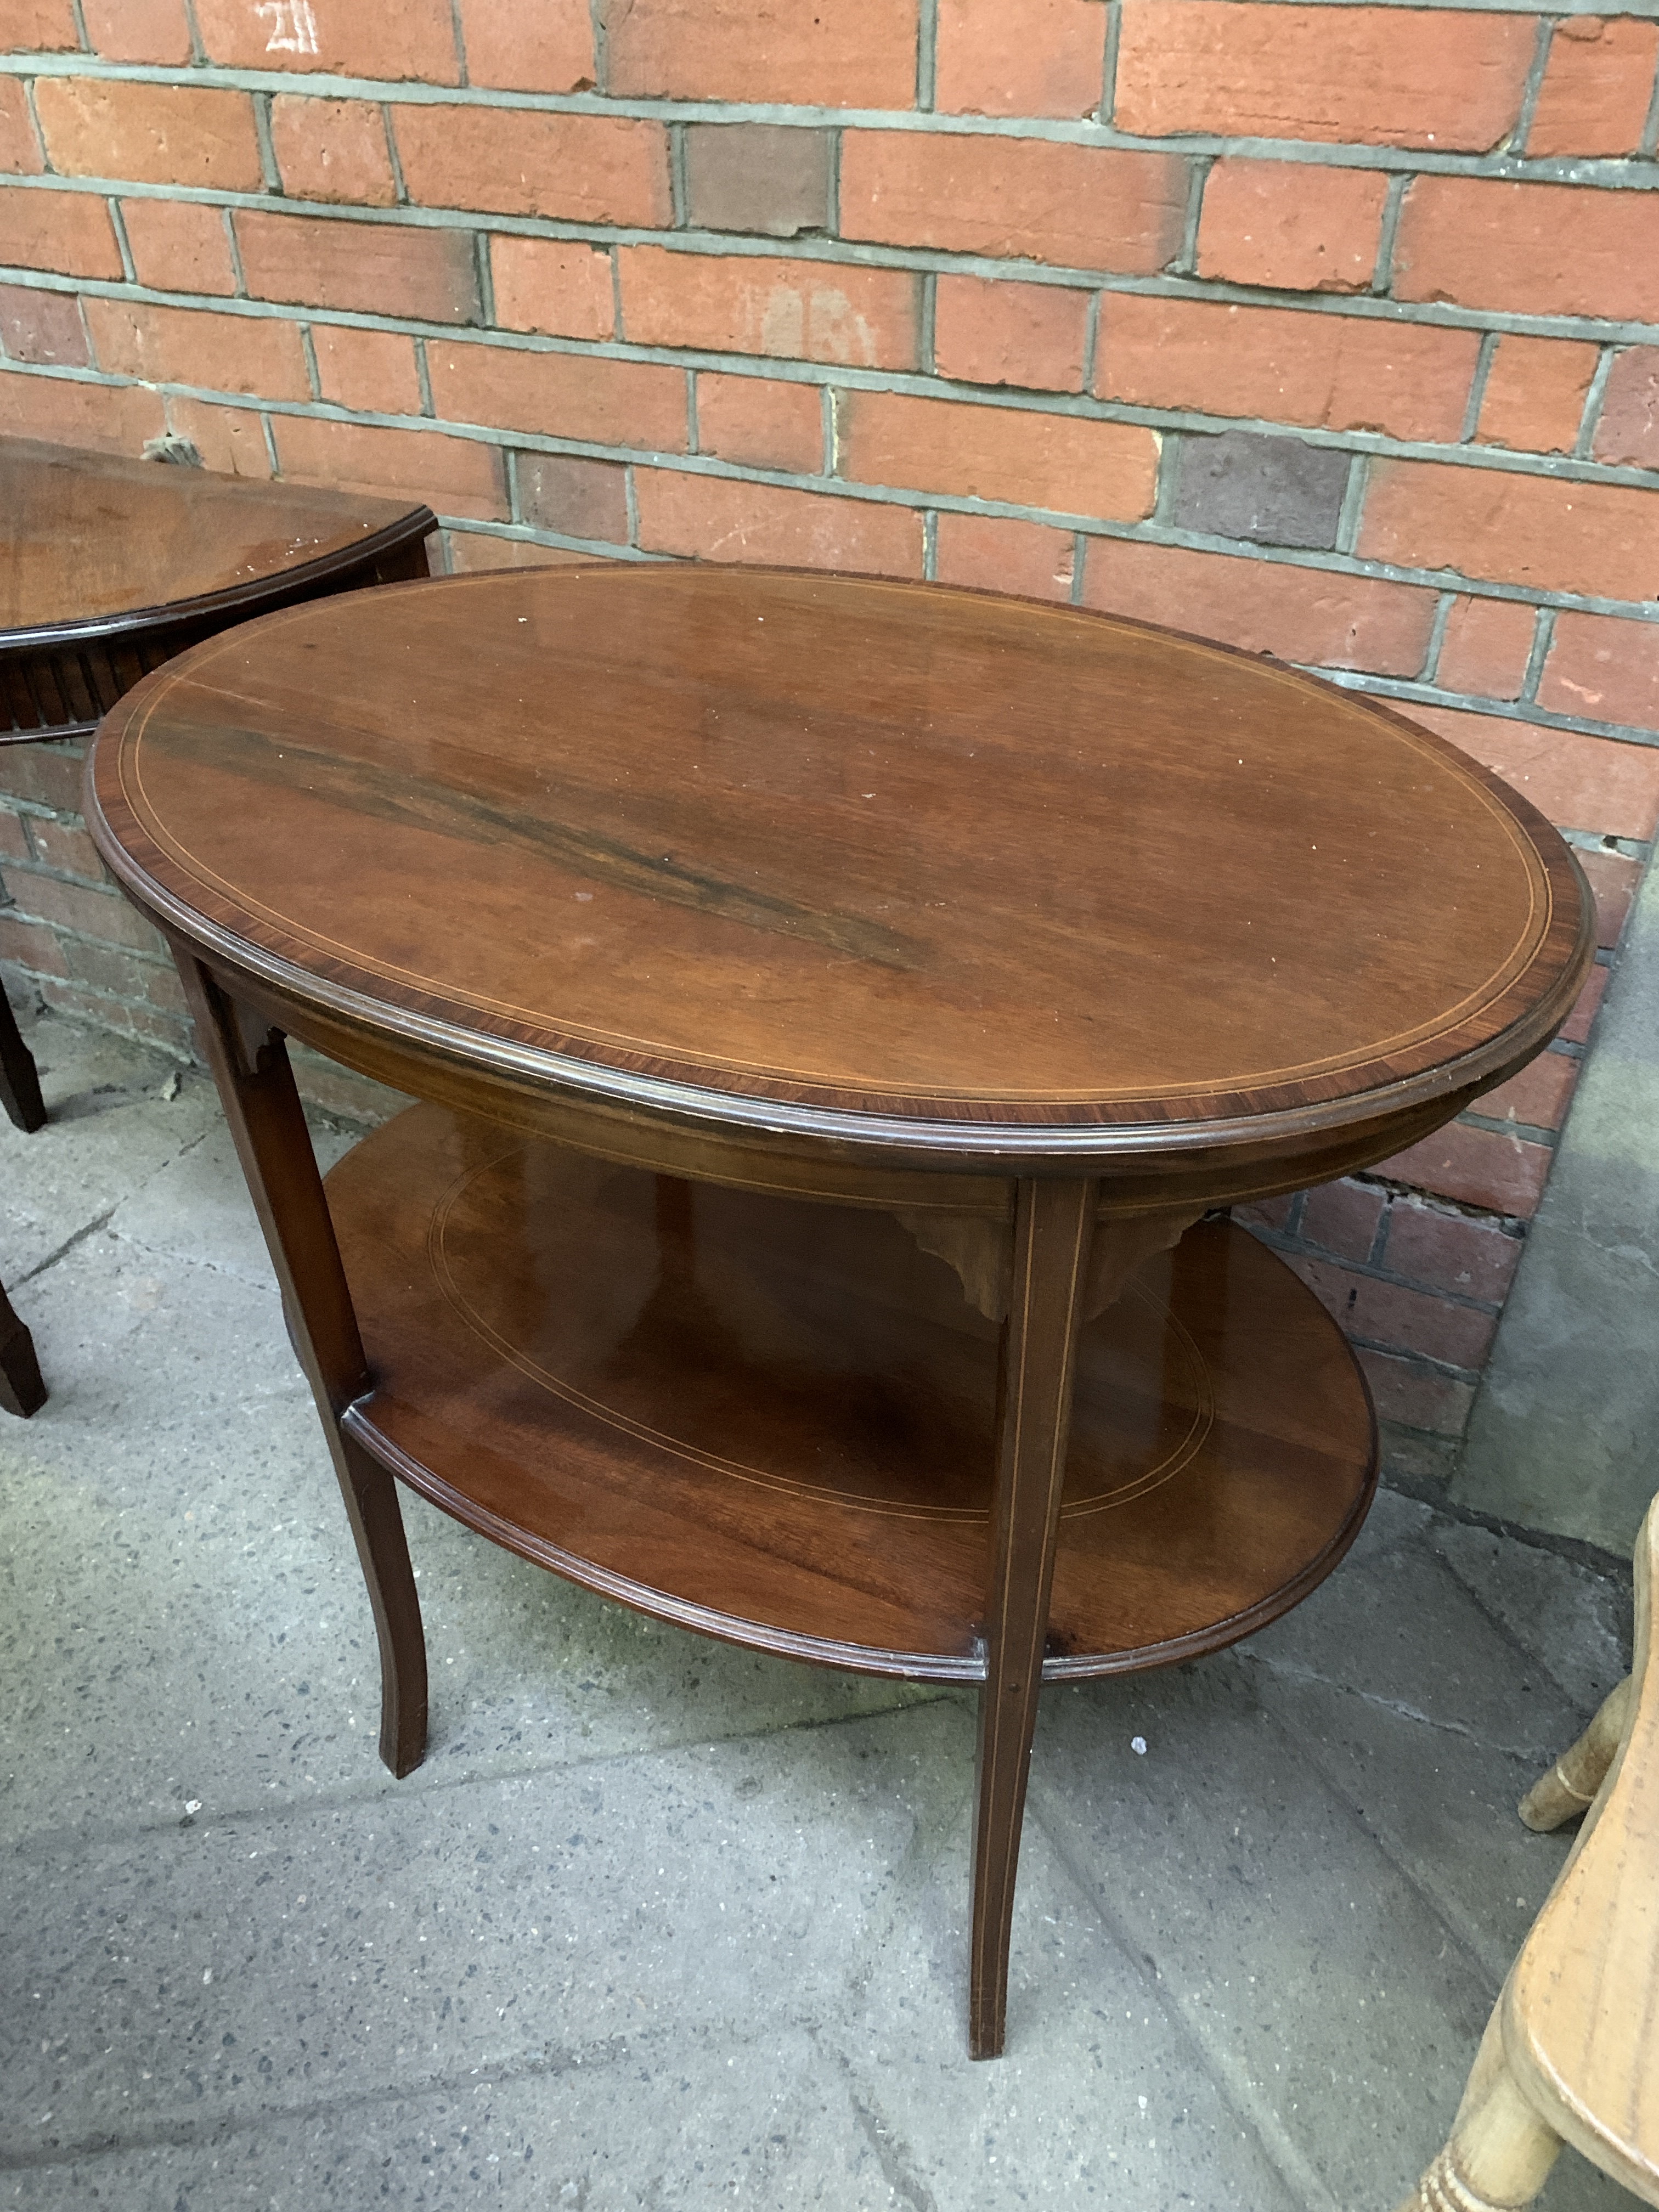 Banded inlaid mahogany oval display table together with small mahogany demi-lune table - Image 2 of 5